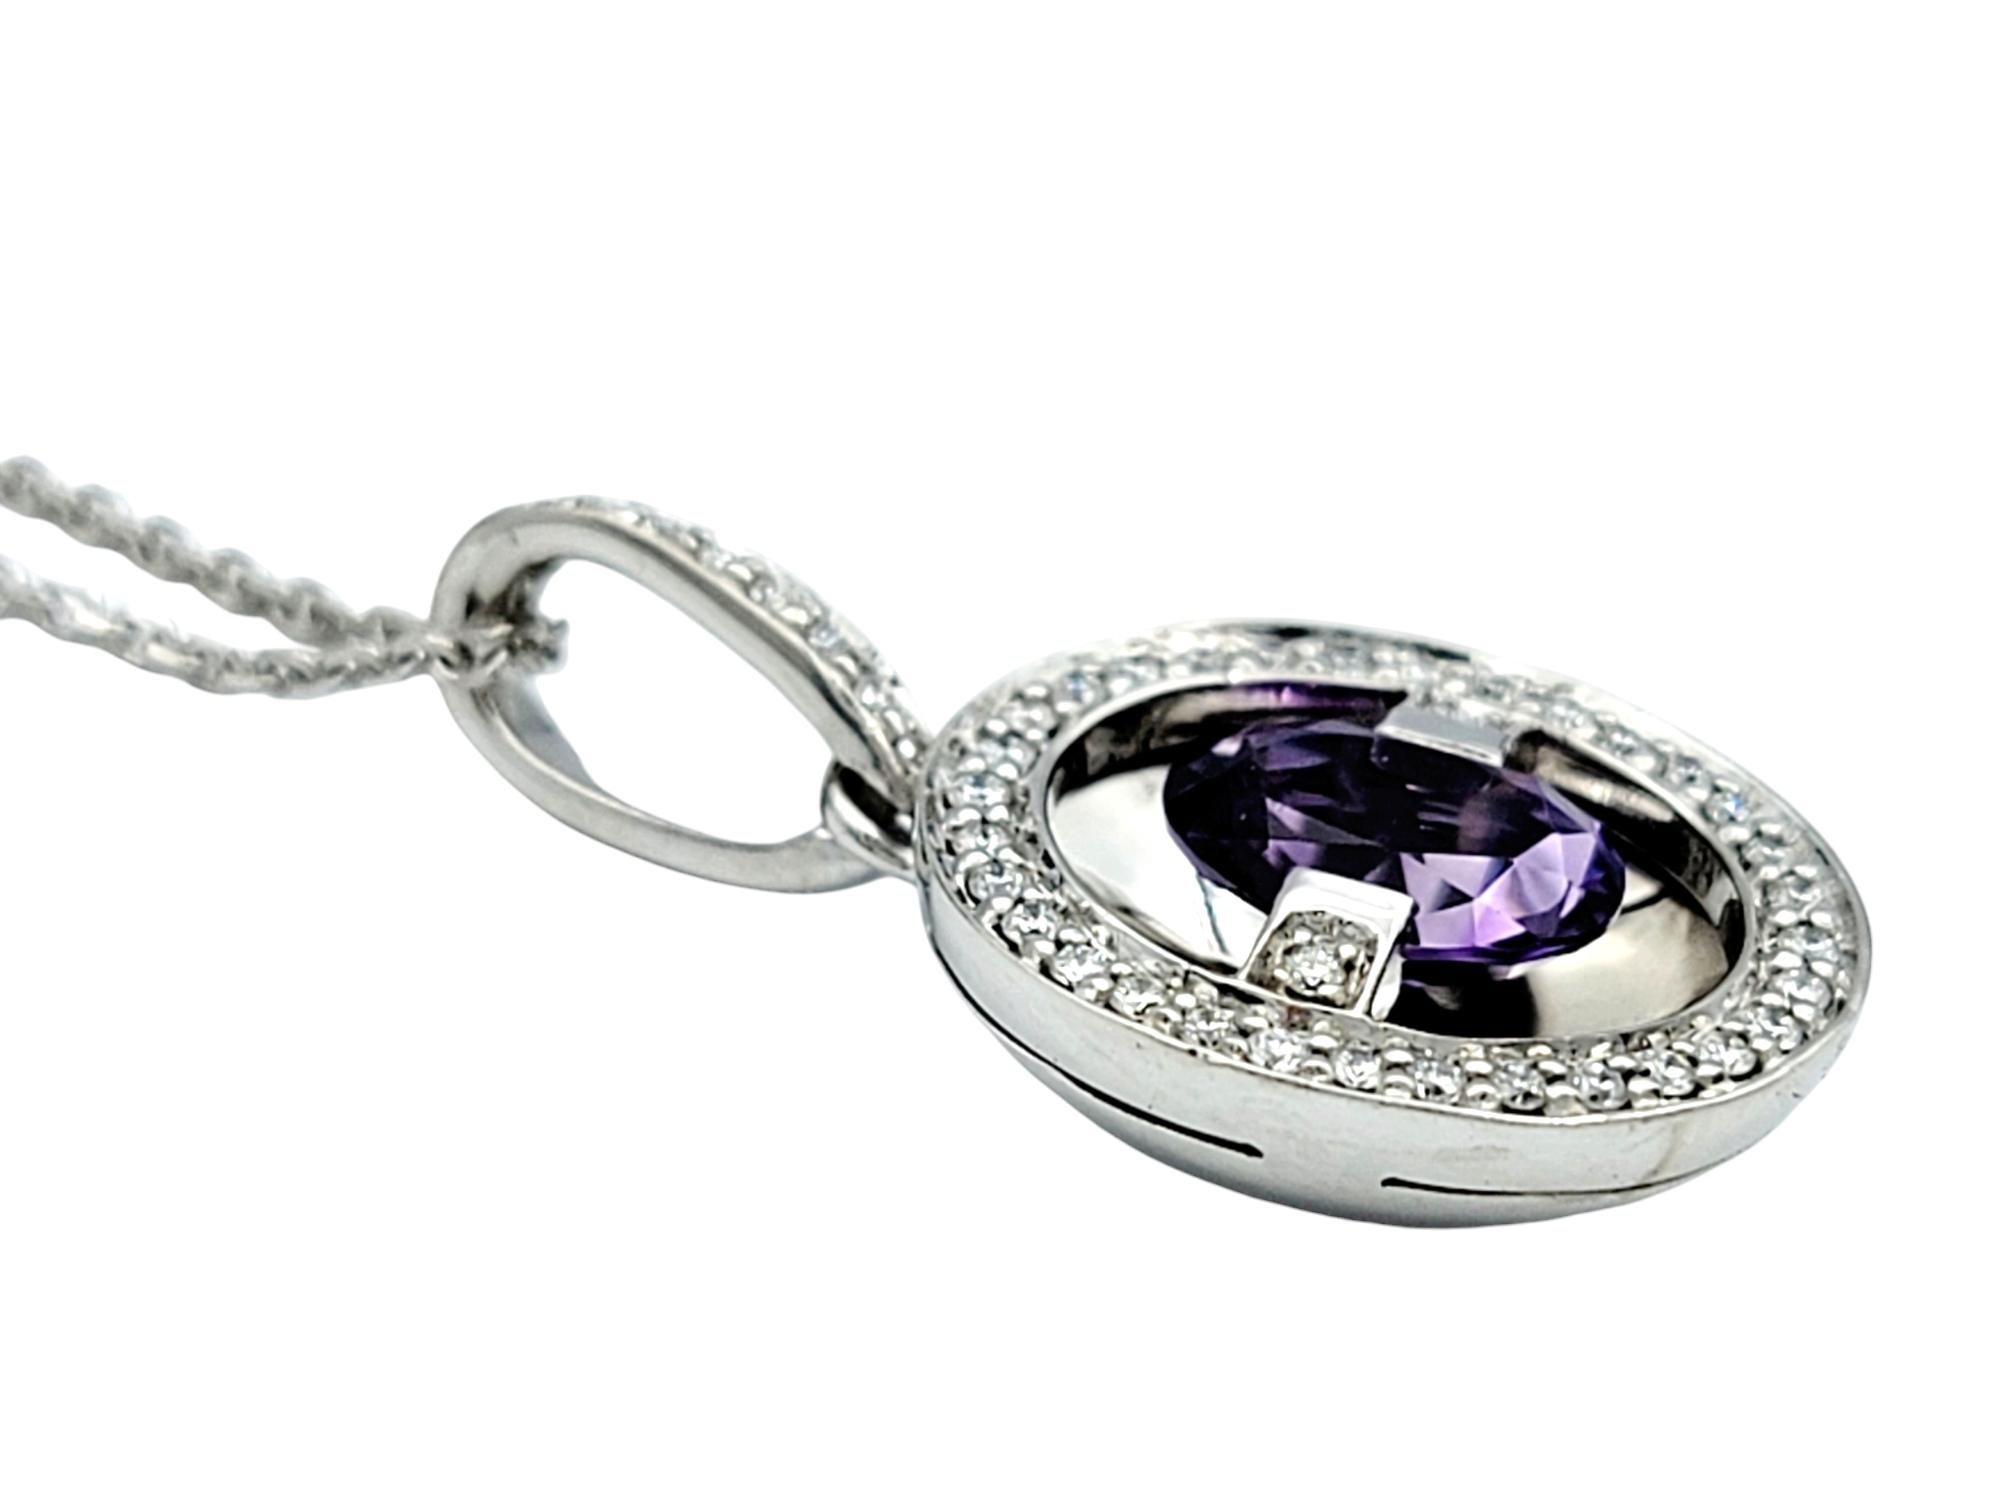 Floating Oval Amethyst and Diamond Pendant Necklace Set in 14 Karat White Gold In Good Condition For Sale In Scottsdale, AZ